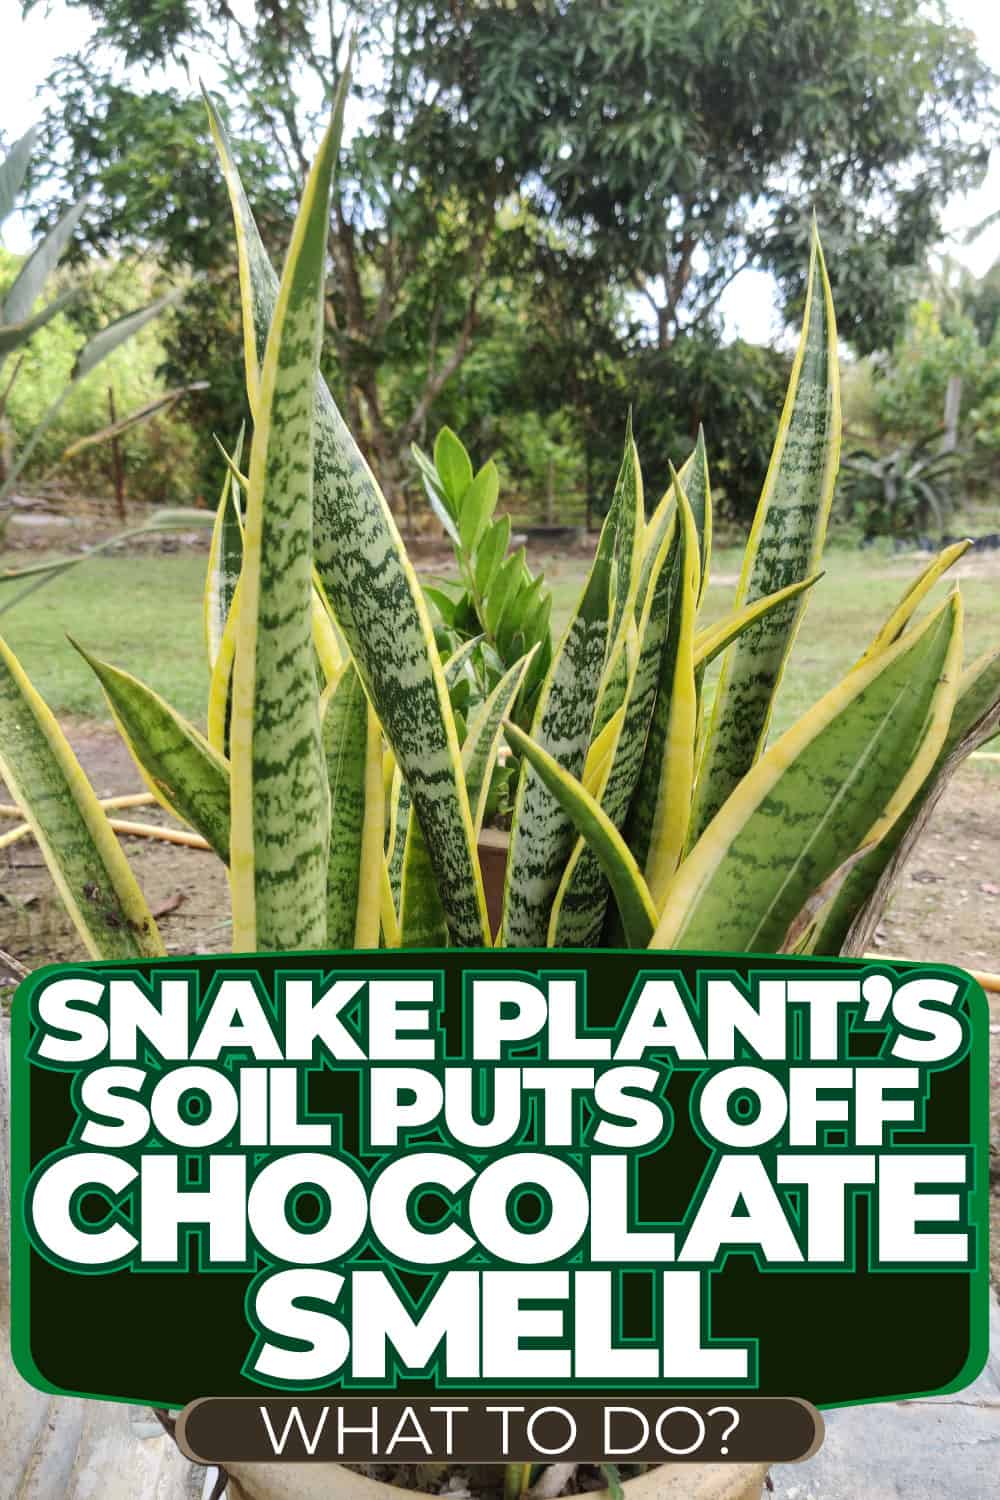 Snake Plant's Soil Puts Off Chocolate Smell. What To Do?